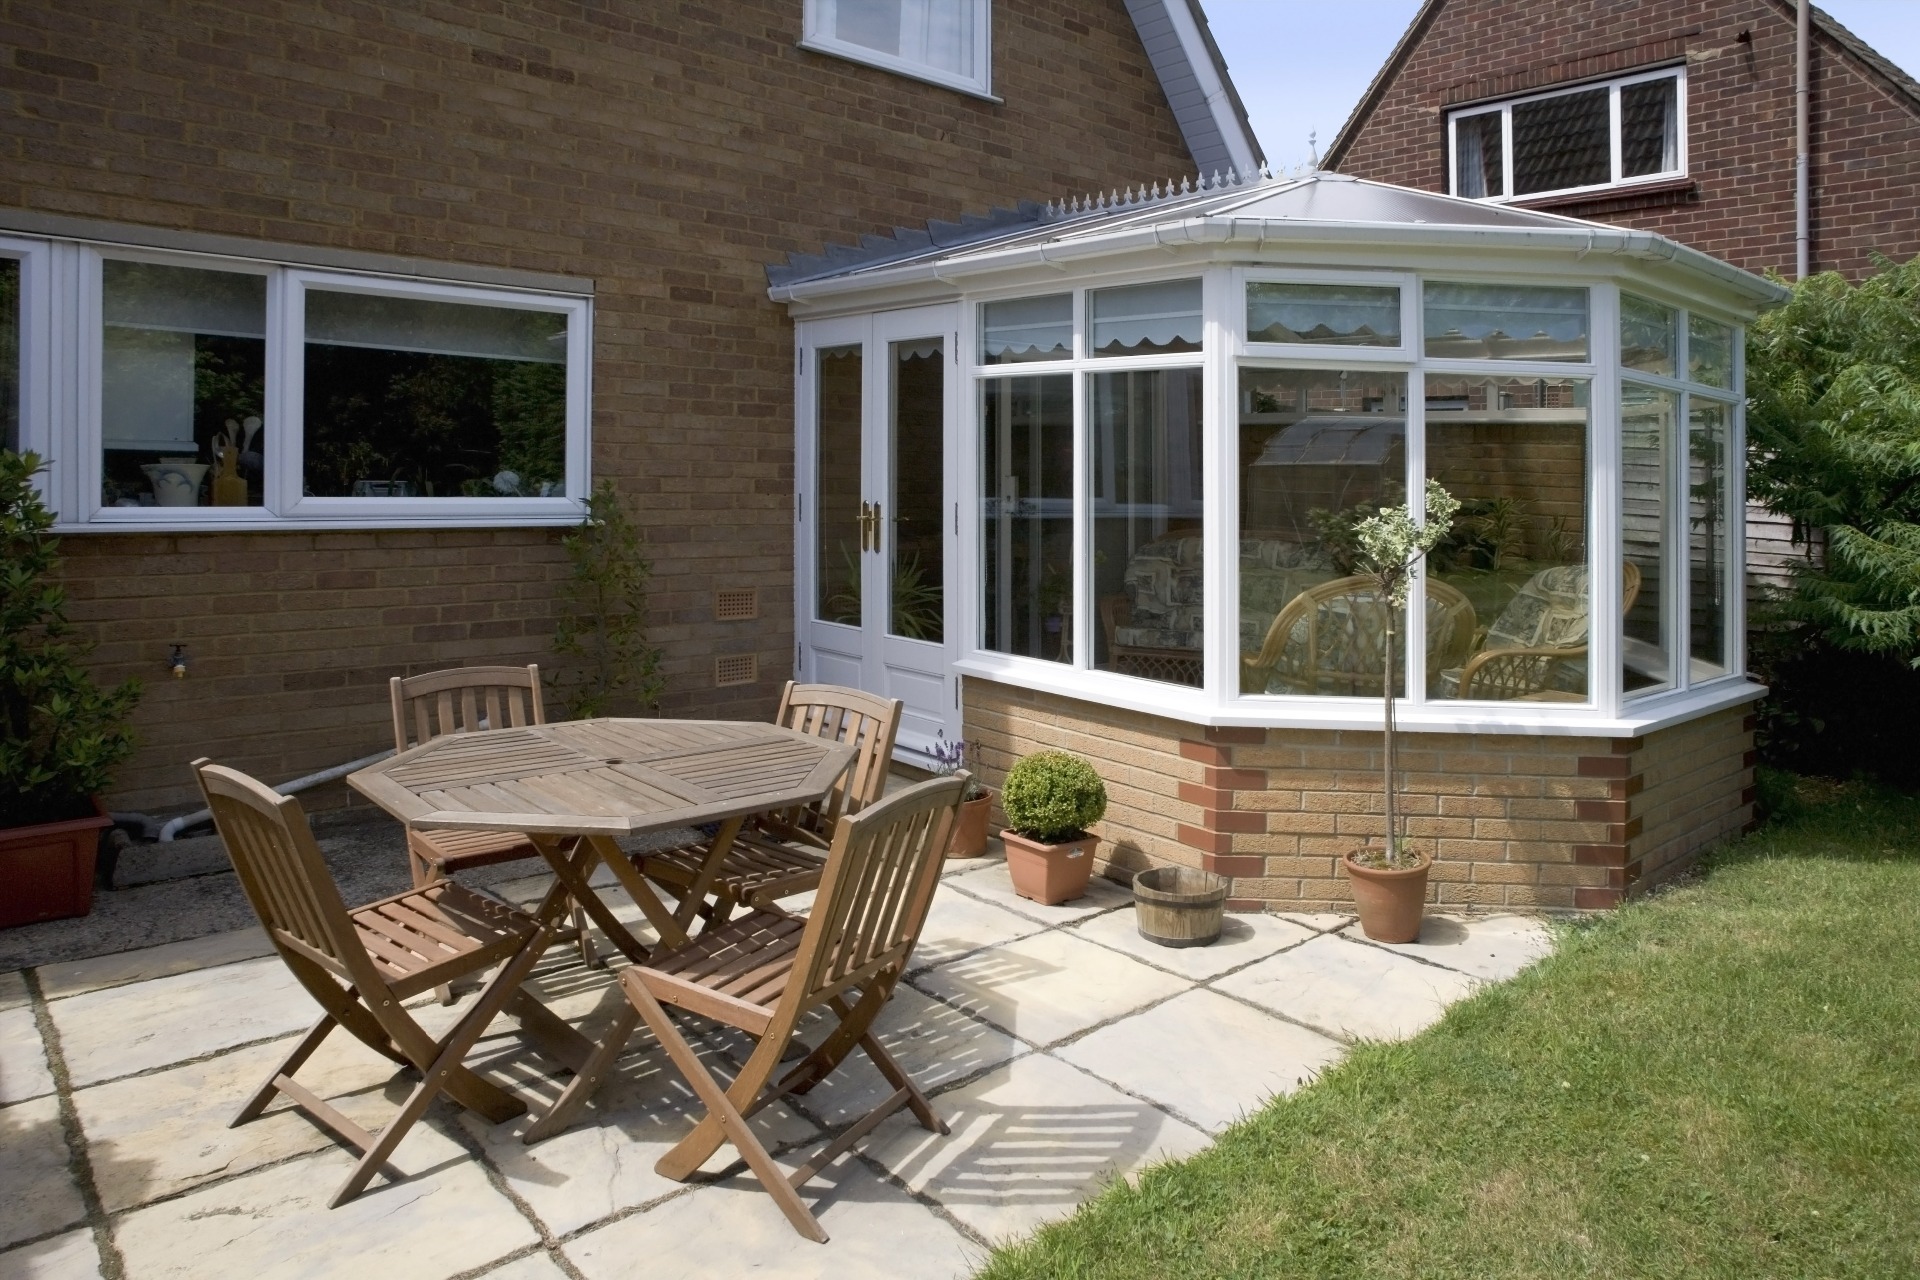 Alternative Uses for a Conservatory